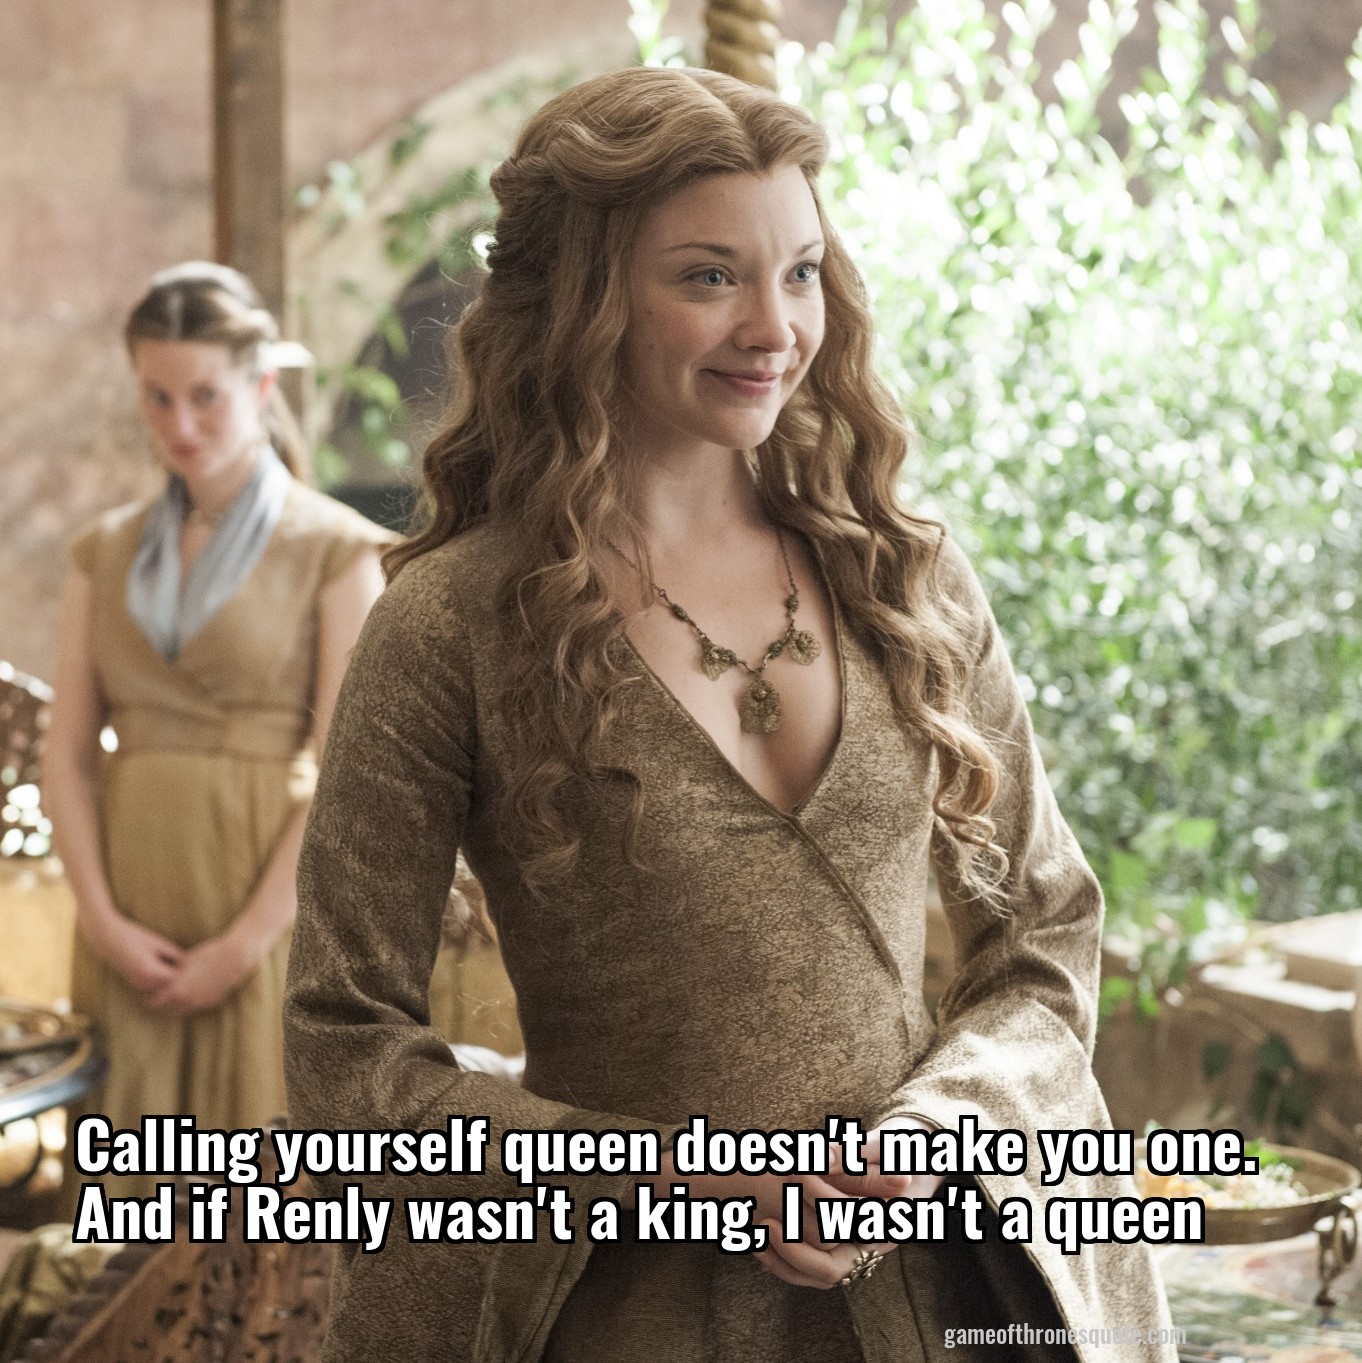 Calling yourself queen doesn't make you one. And if Renly wasn't a king, I wasn't a queen